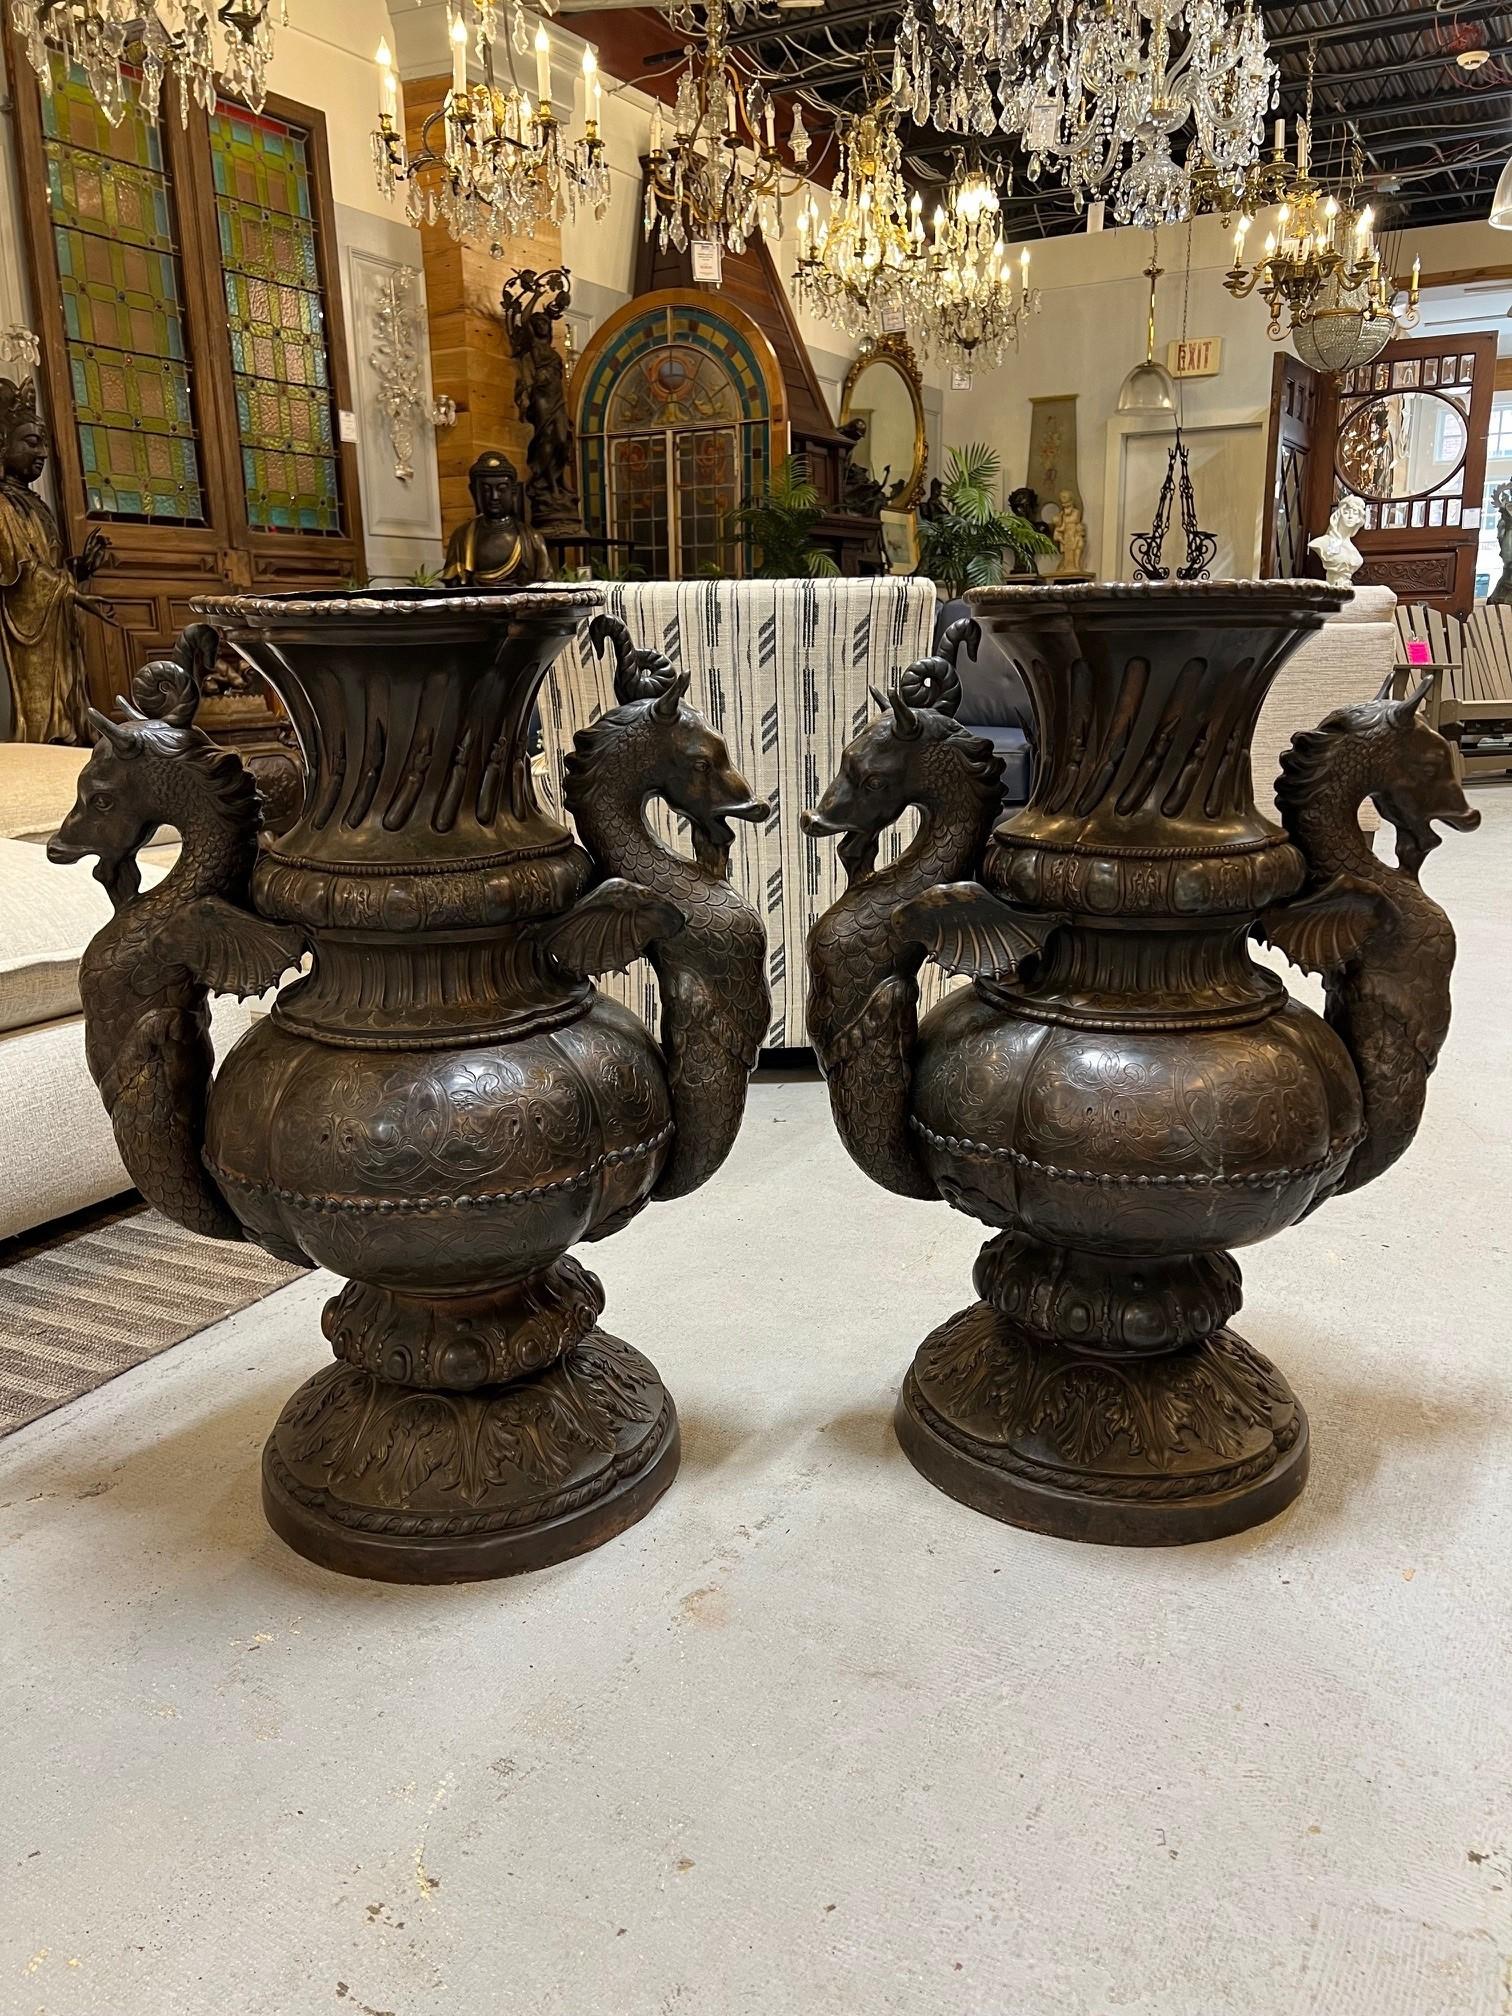 A rare pair of 19th century handcrafted copper urns with mythological seahorses and beautiful scroll work. They do have an iron brace or bracket on the inside to support the copper, shown in the photos. The opening is 13